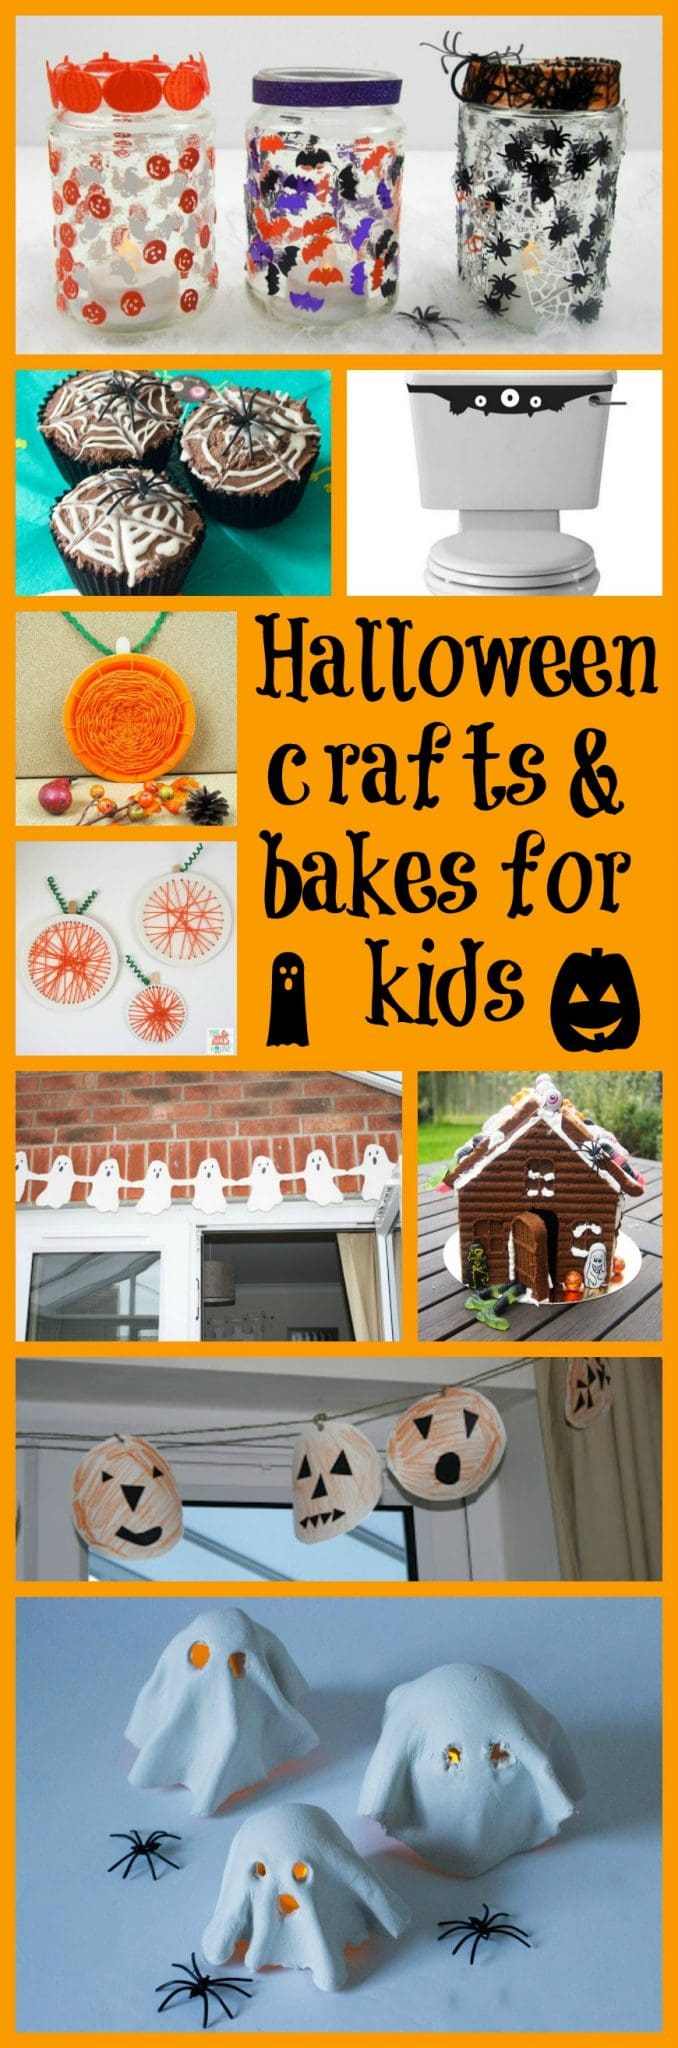 Halloween crafts and bakes for kids